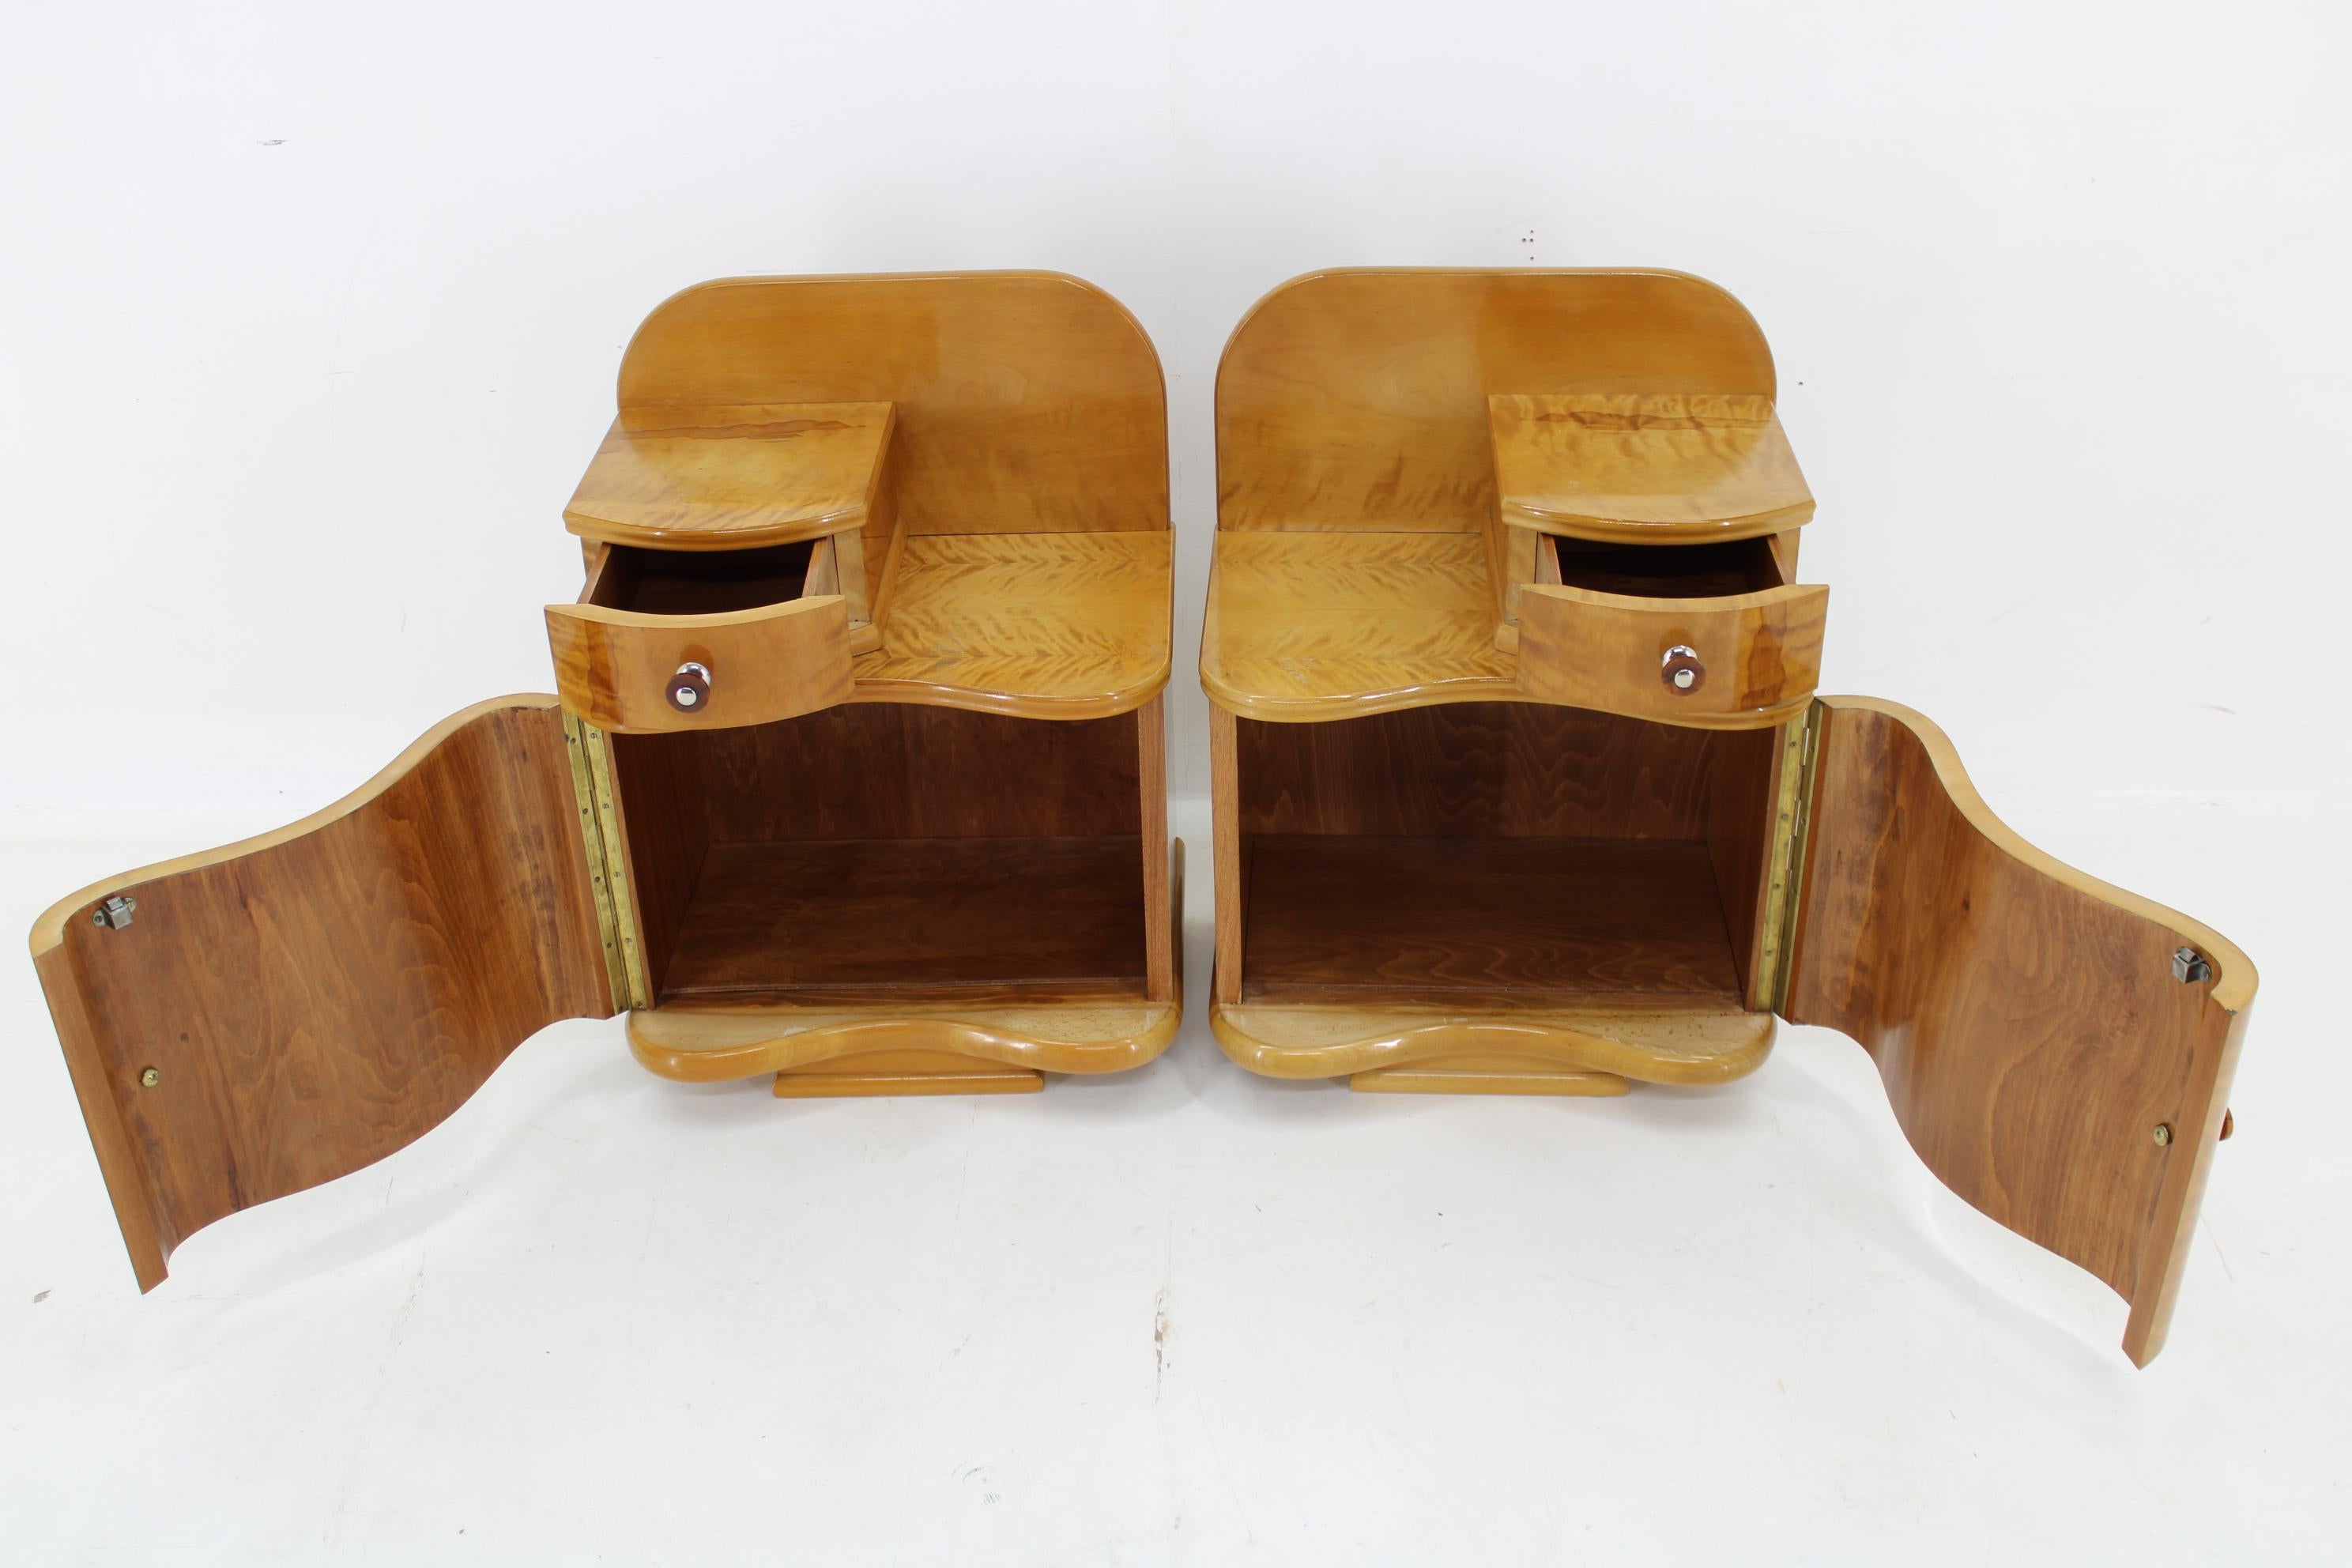 1950s Pair of Bedside Tables, Czechoslovakia For Sale 1